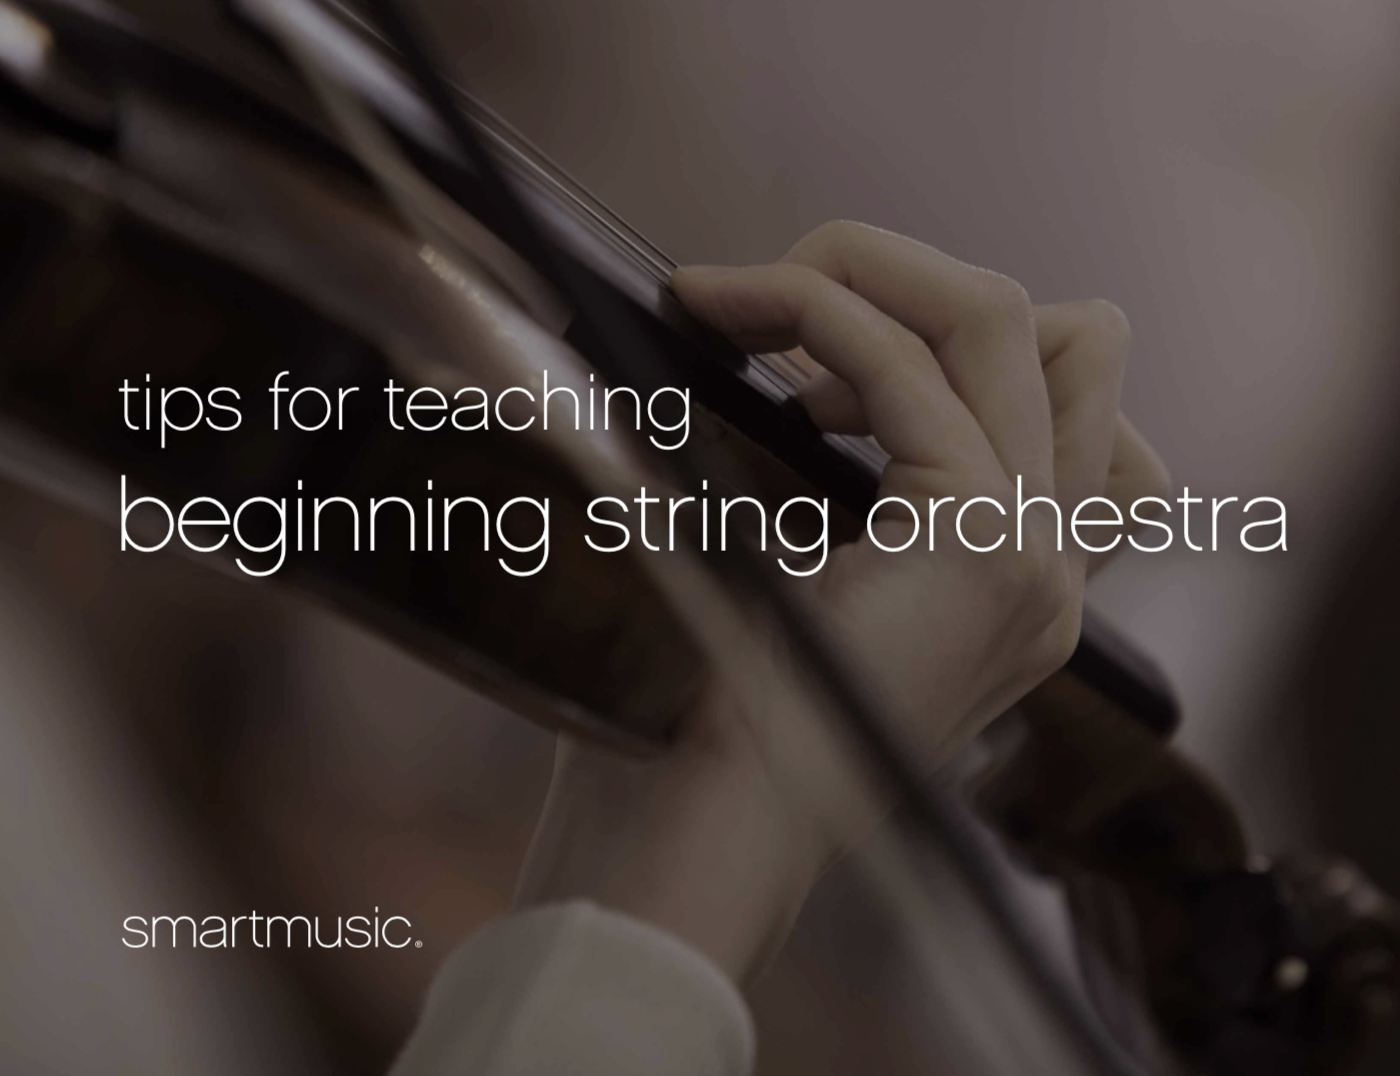 tips for teaching beginning string orchestra